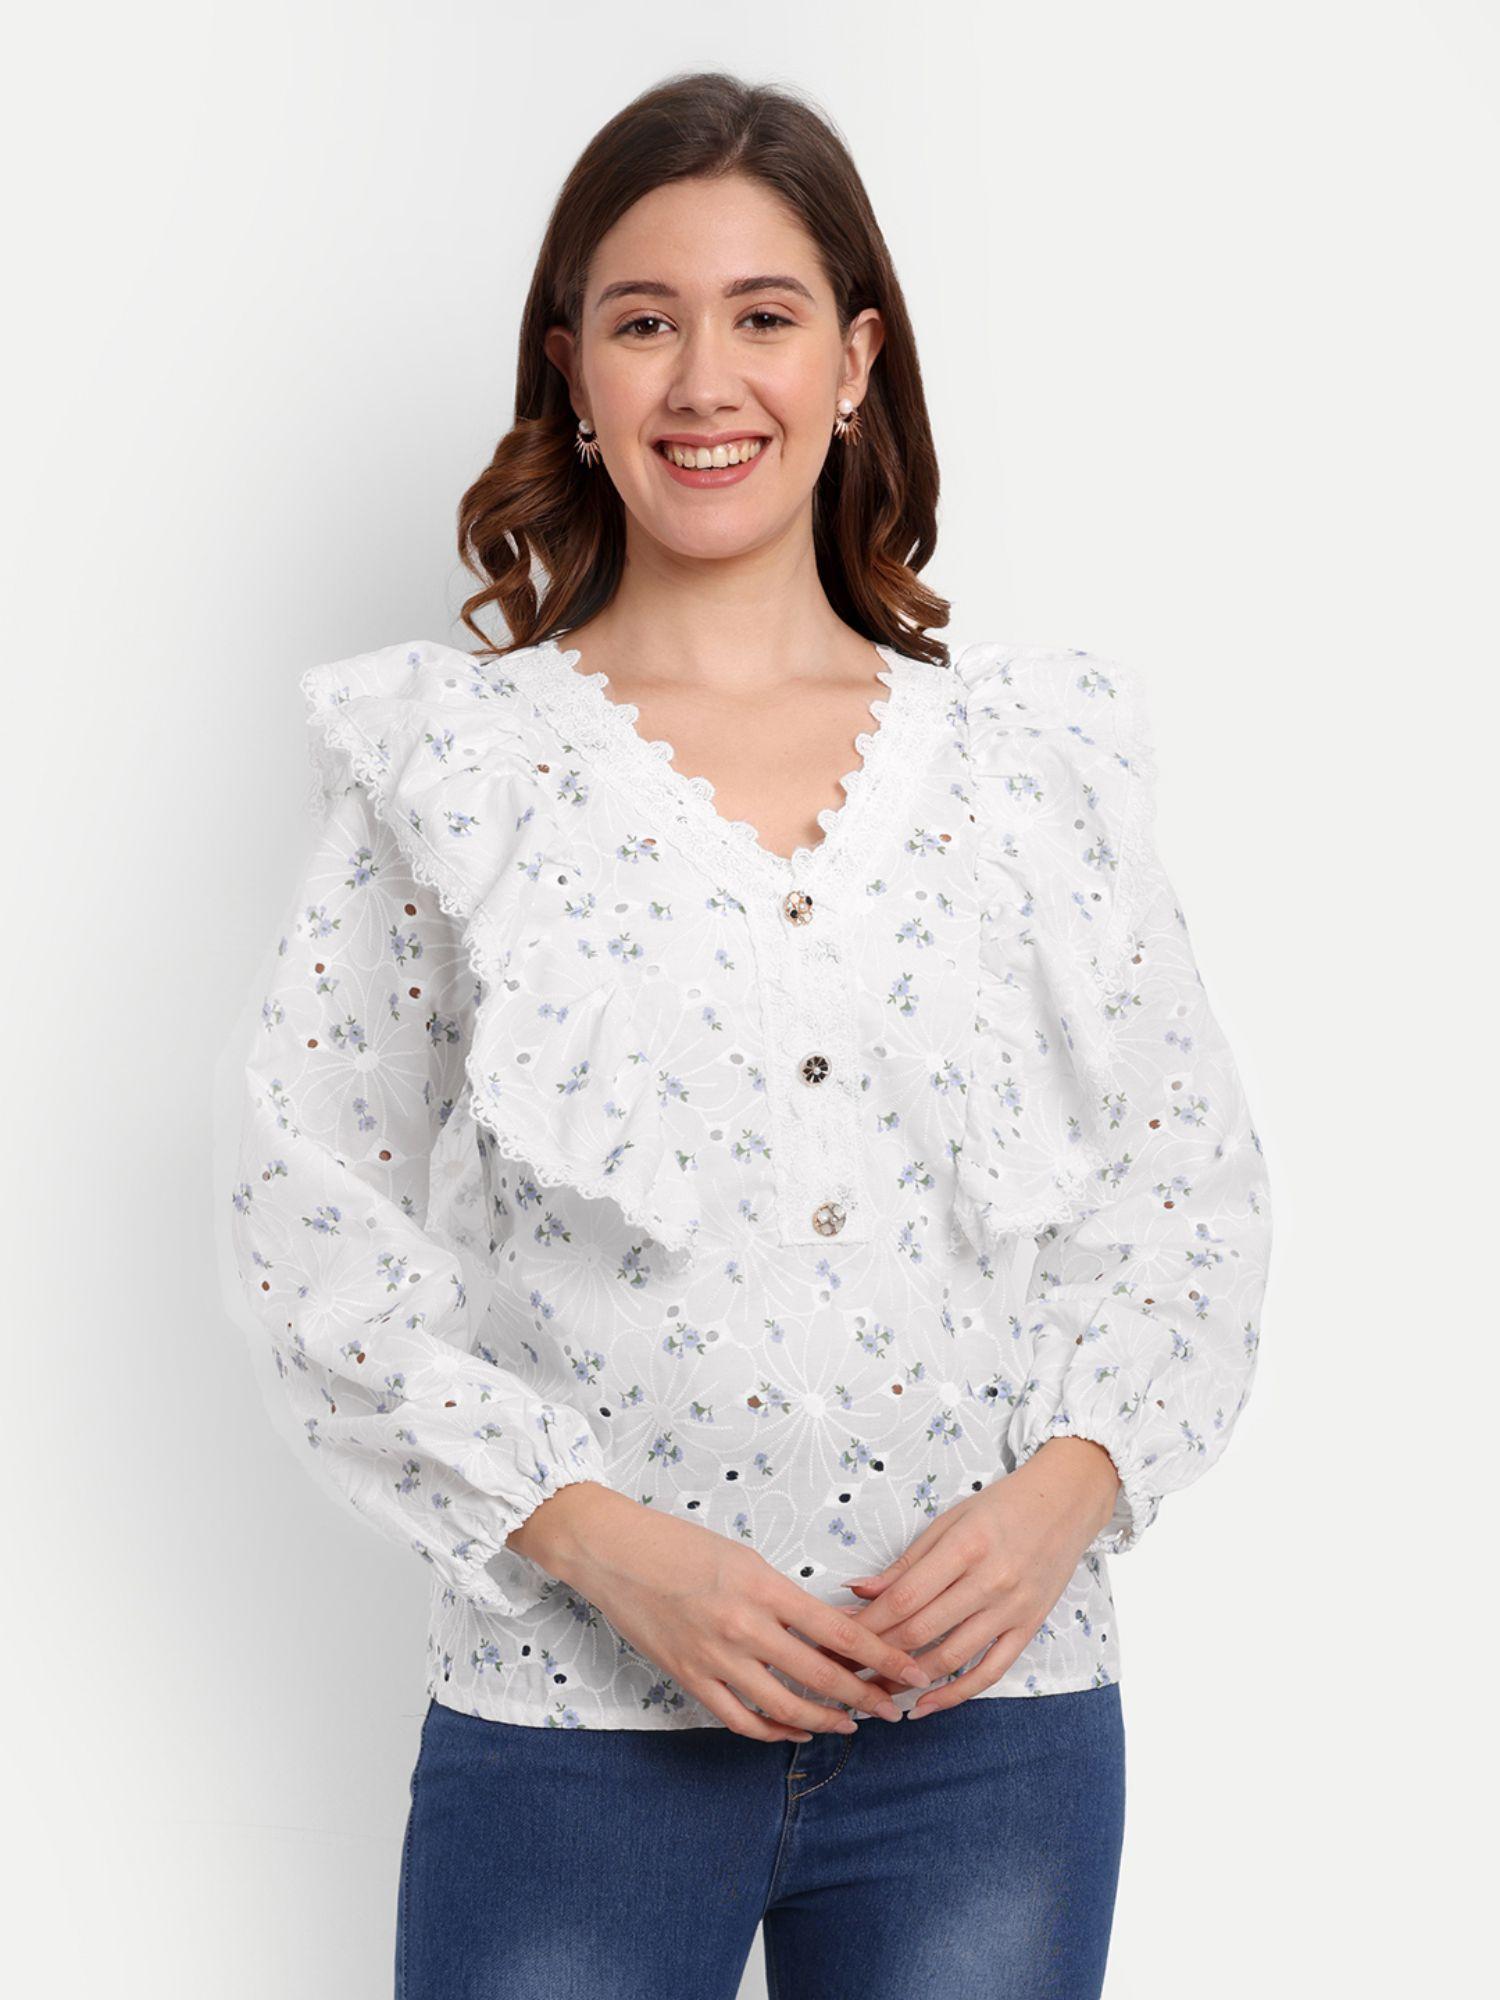 white floral printed schiffli blouse with v-neckline with ruffle detailing